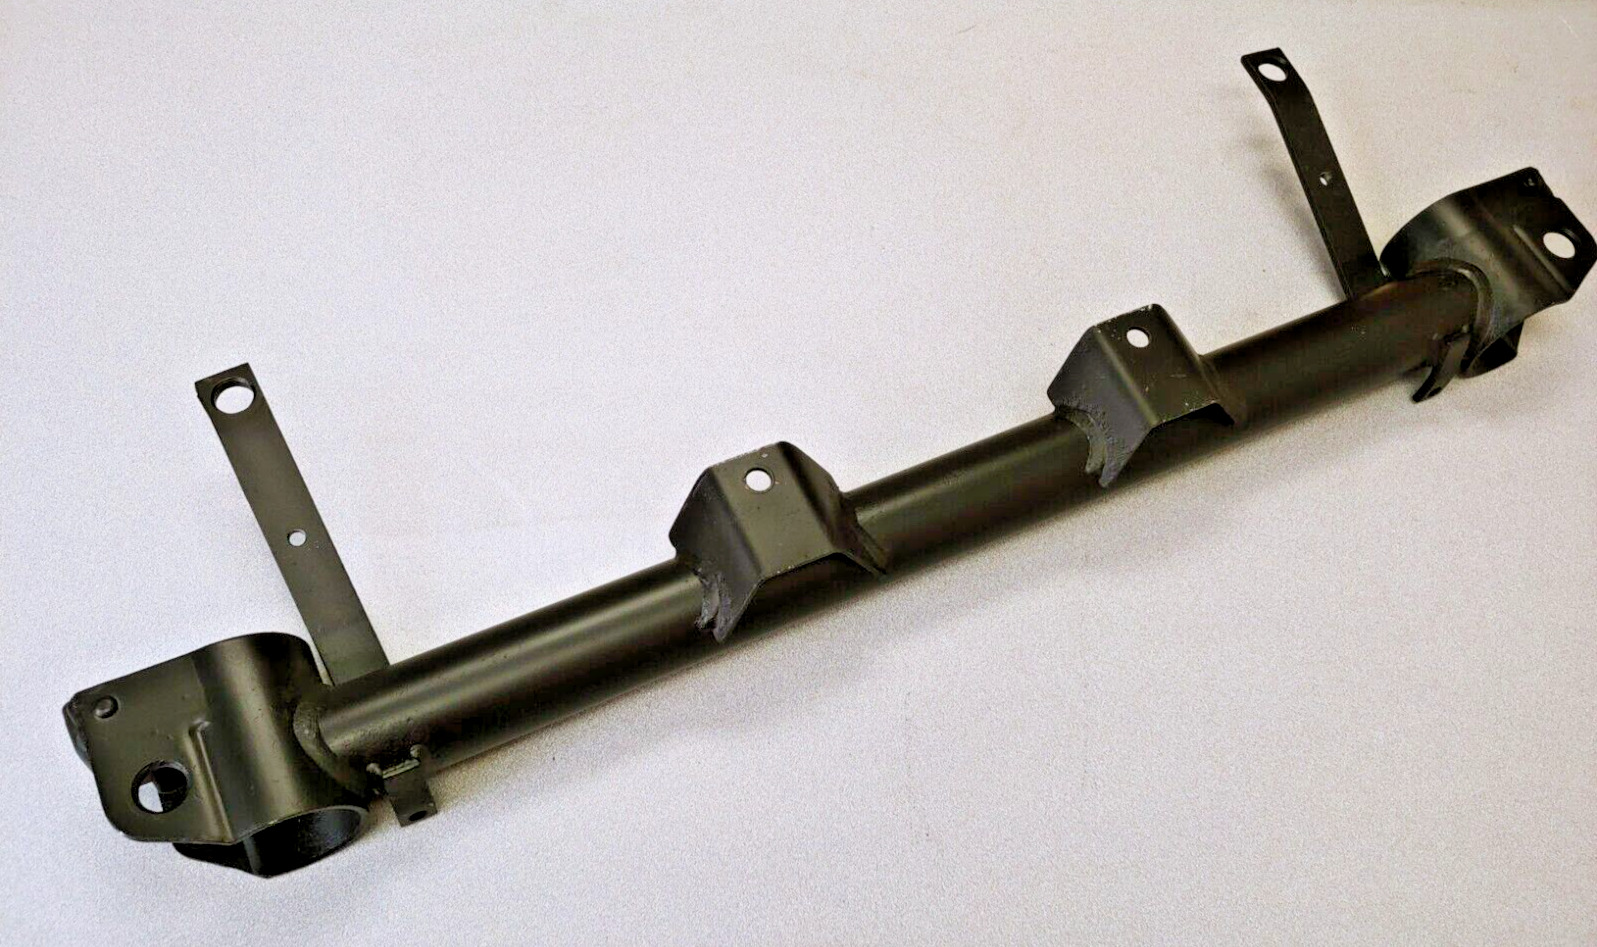 VERY NICE ORIGINAL PORSCHE 911 912 FRONT CROSS MEMBER AUXILIARY SUPPORT NLA 13